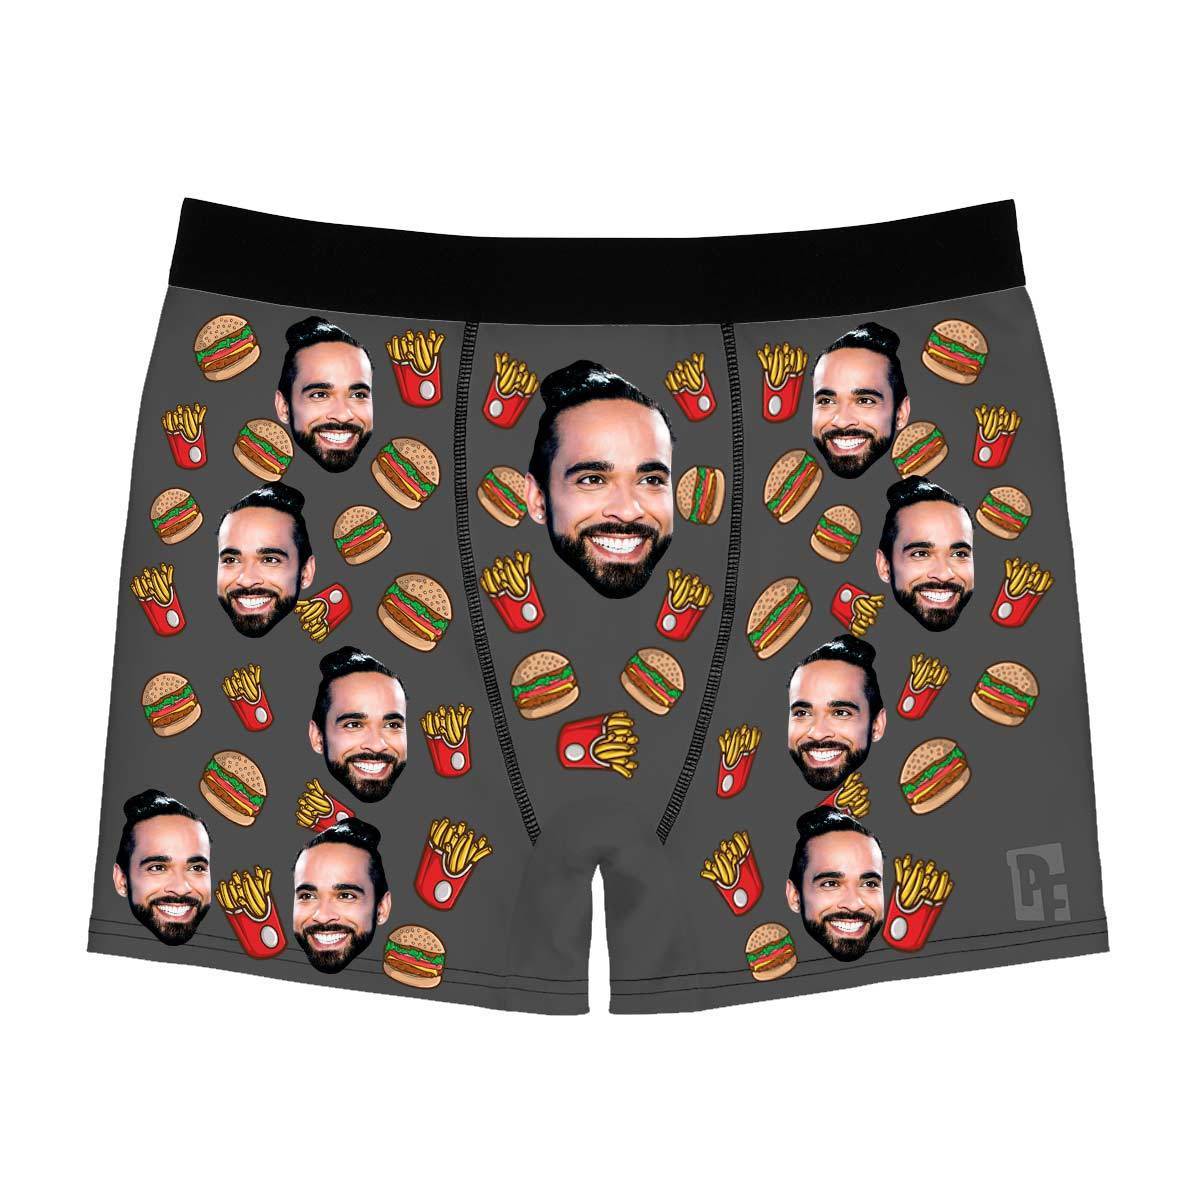 Dark Fastfood men's boxer briefs personalized with photo printed on them